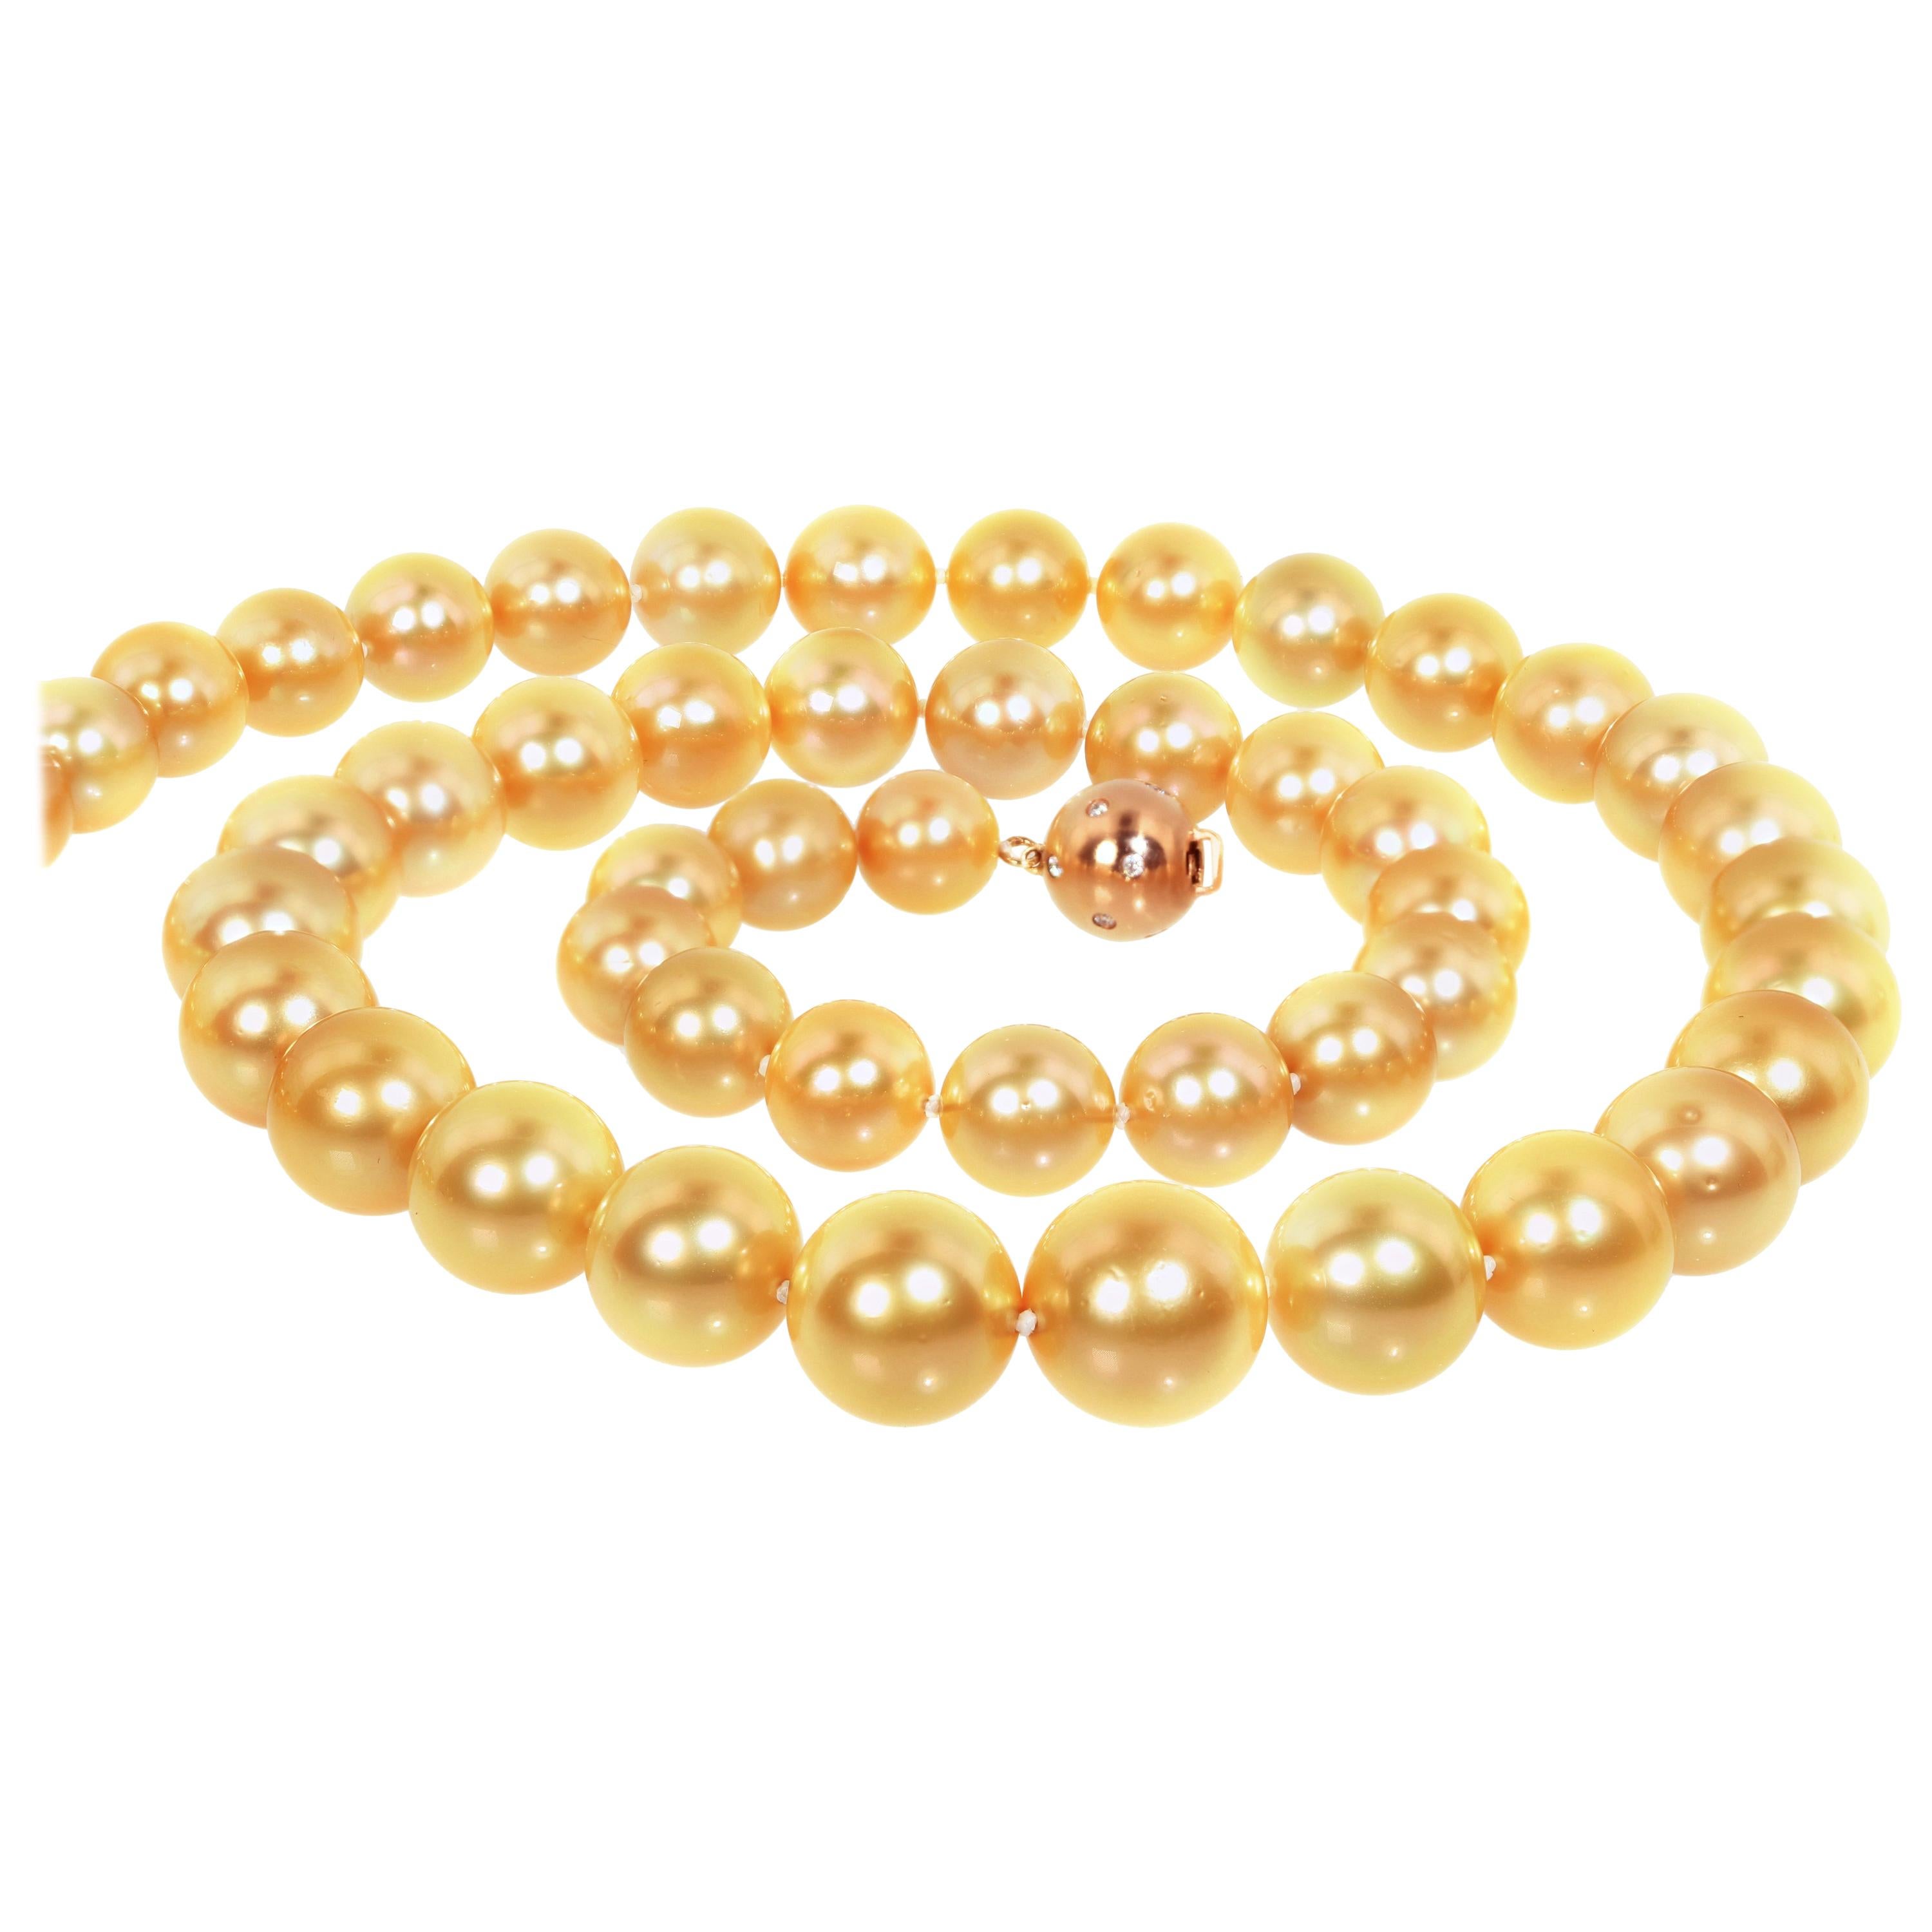 Golden South Sea Pearl Necklace with 18K Gold Clasp with Diamonds